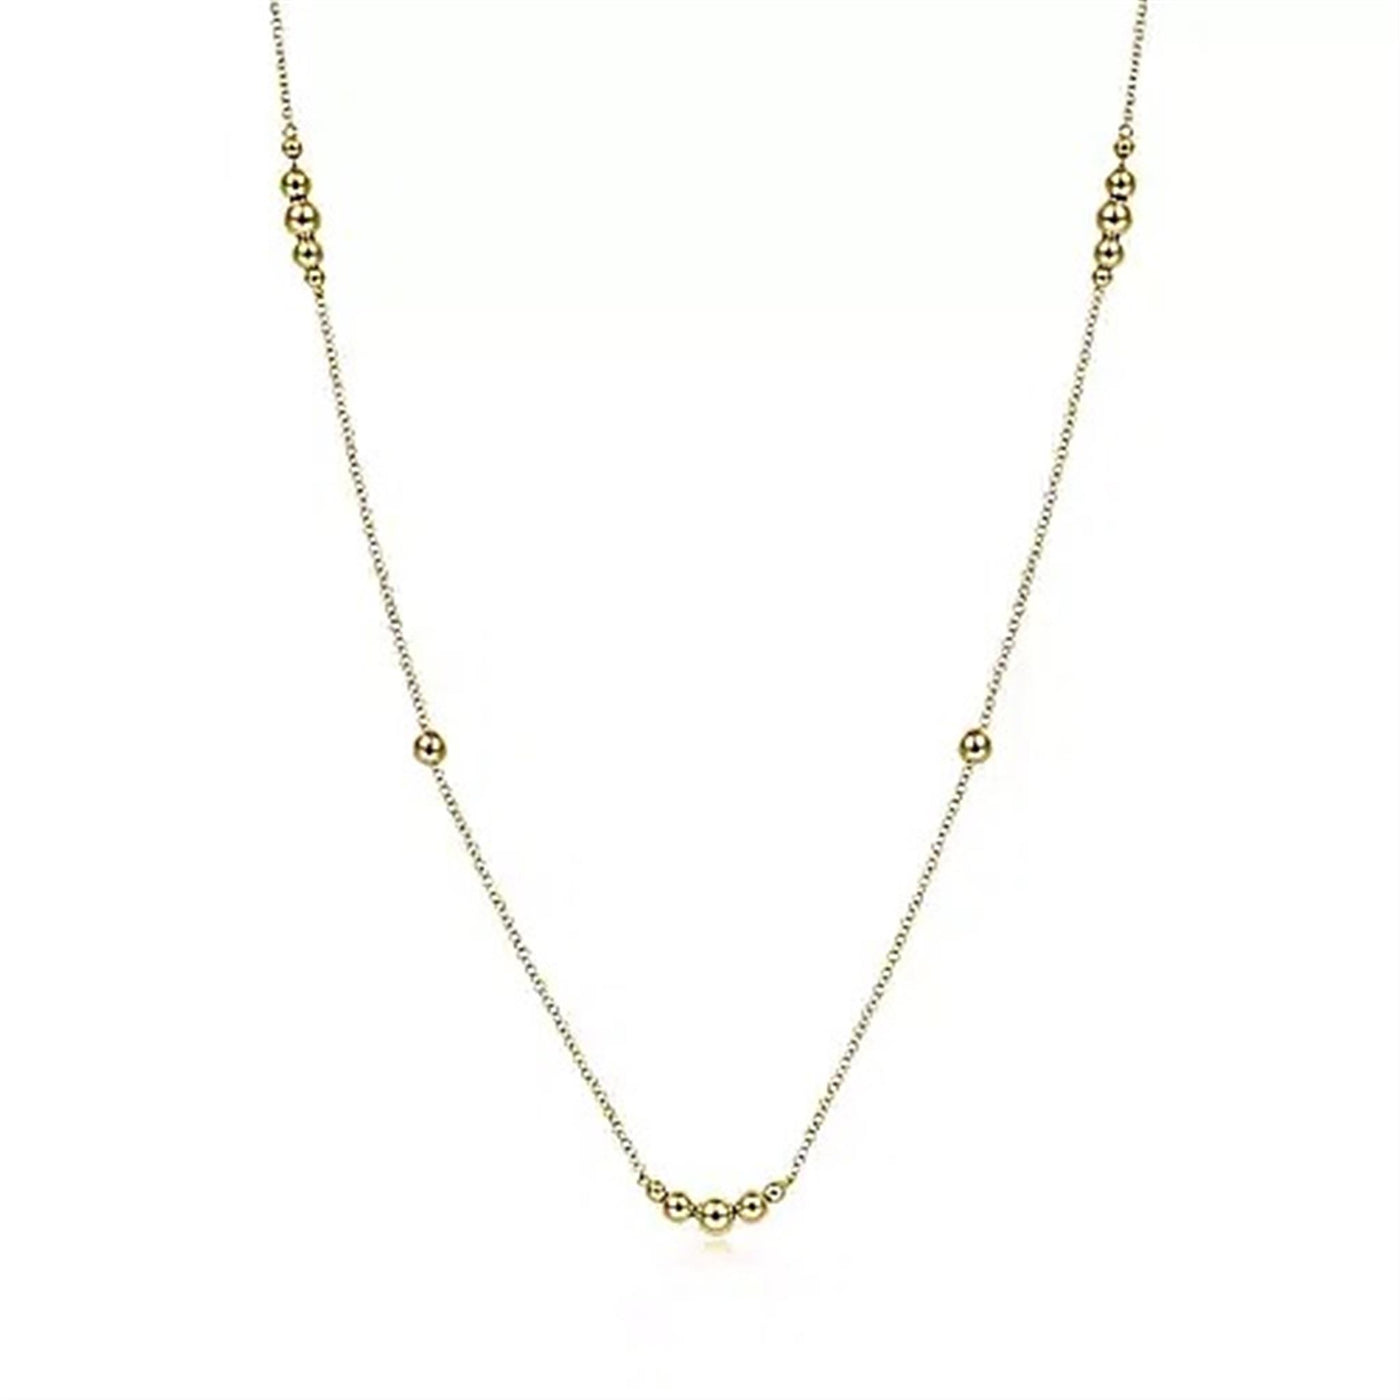 14K Yellow Gold 28" Bujukan Style Station Necklace